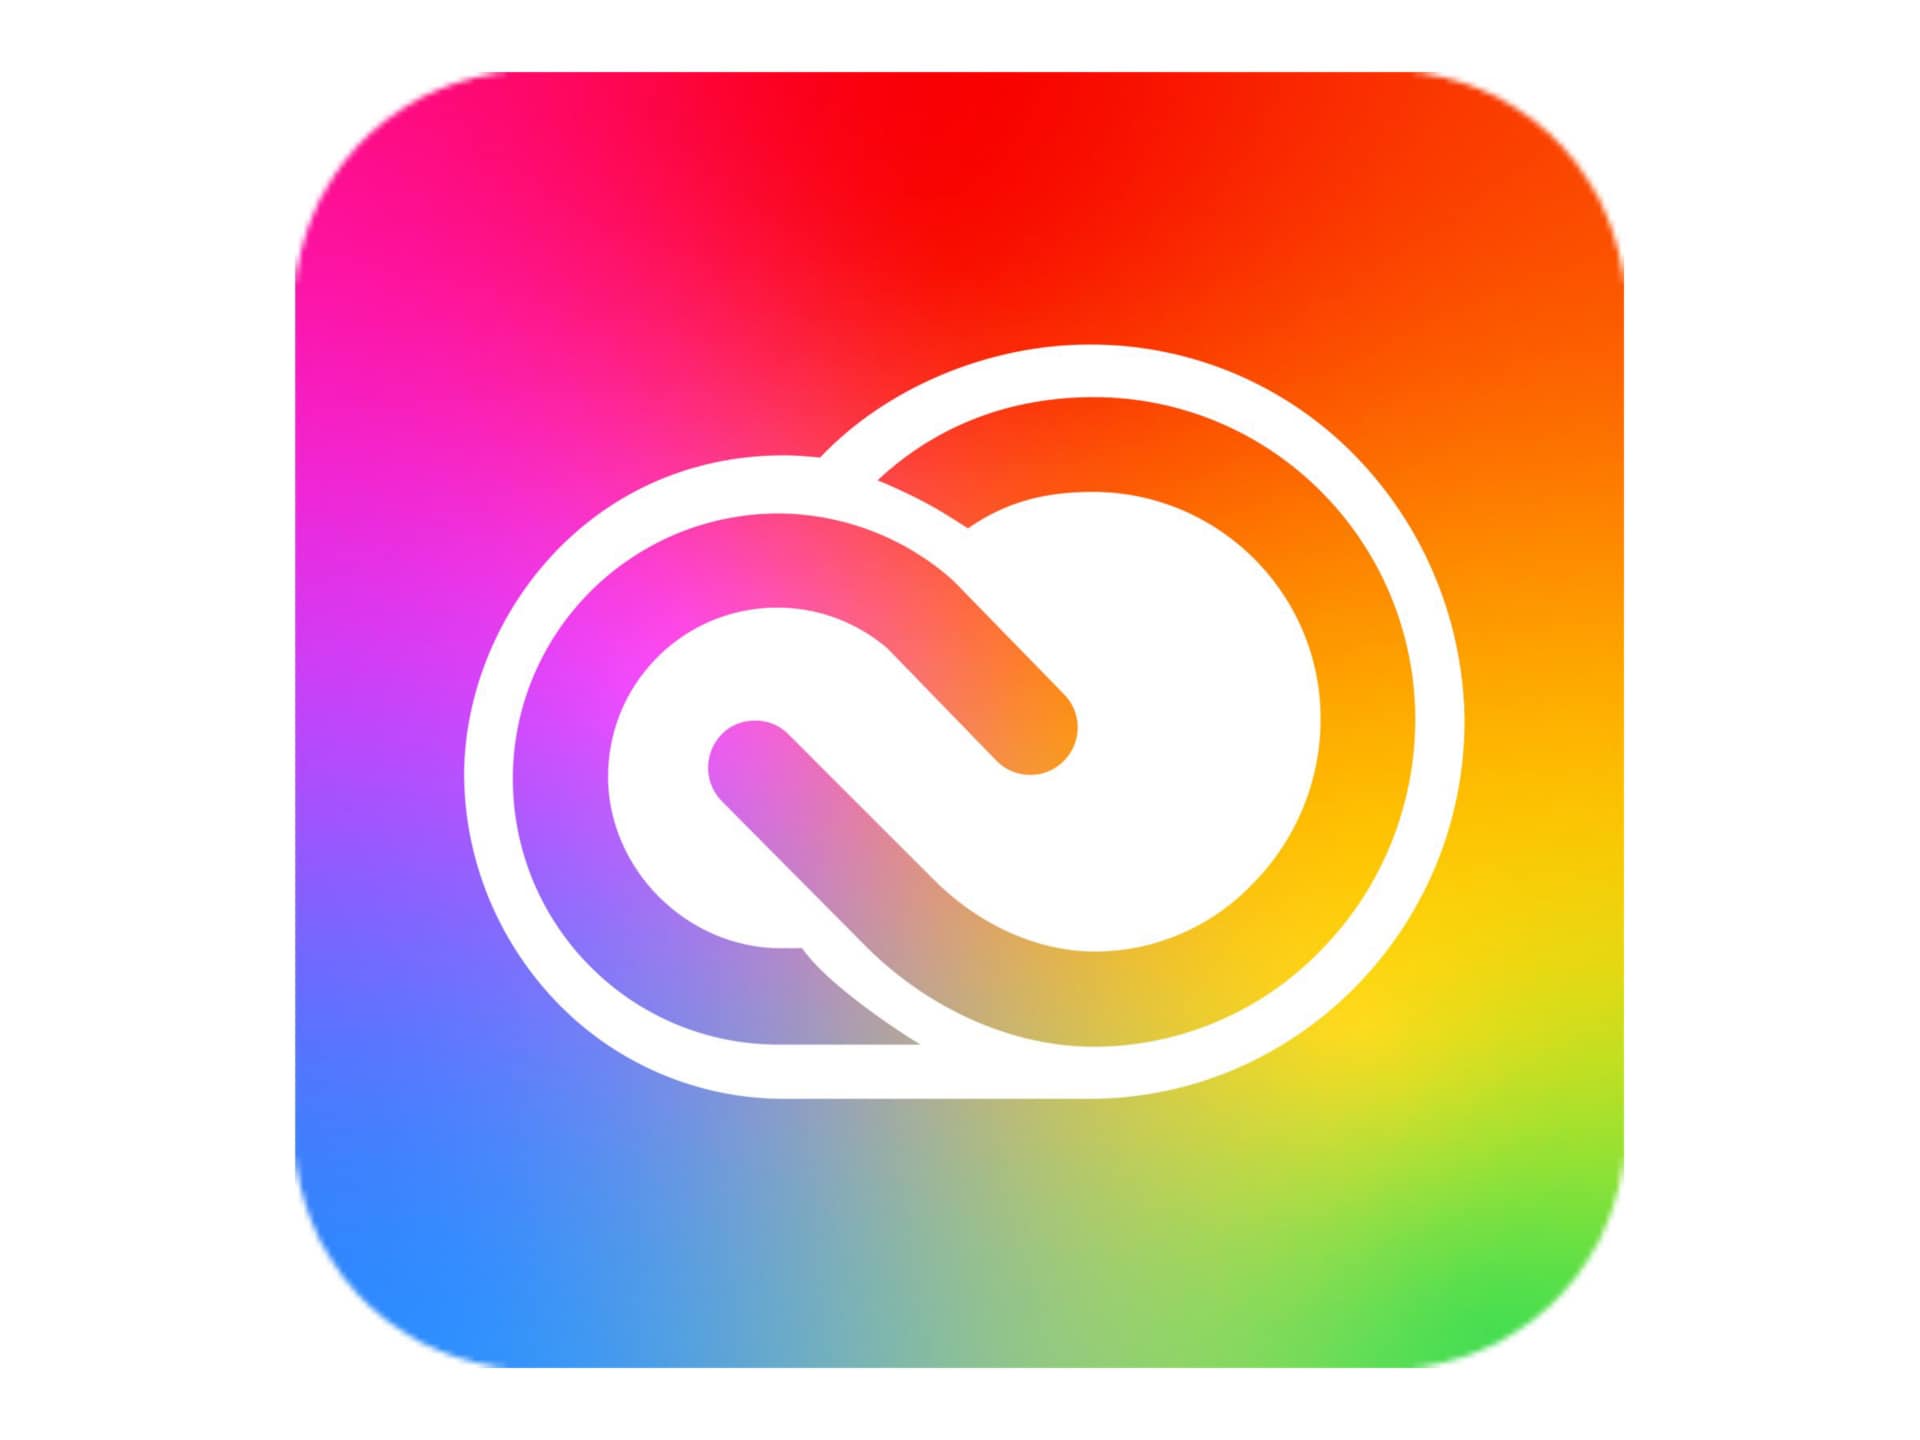 Adobe Creative Cloud for Enterprise - All Apps - Subscription New (8 months) - 1 device